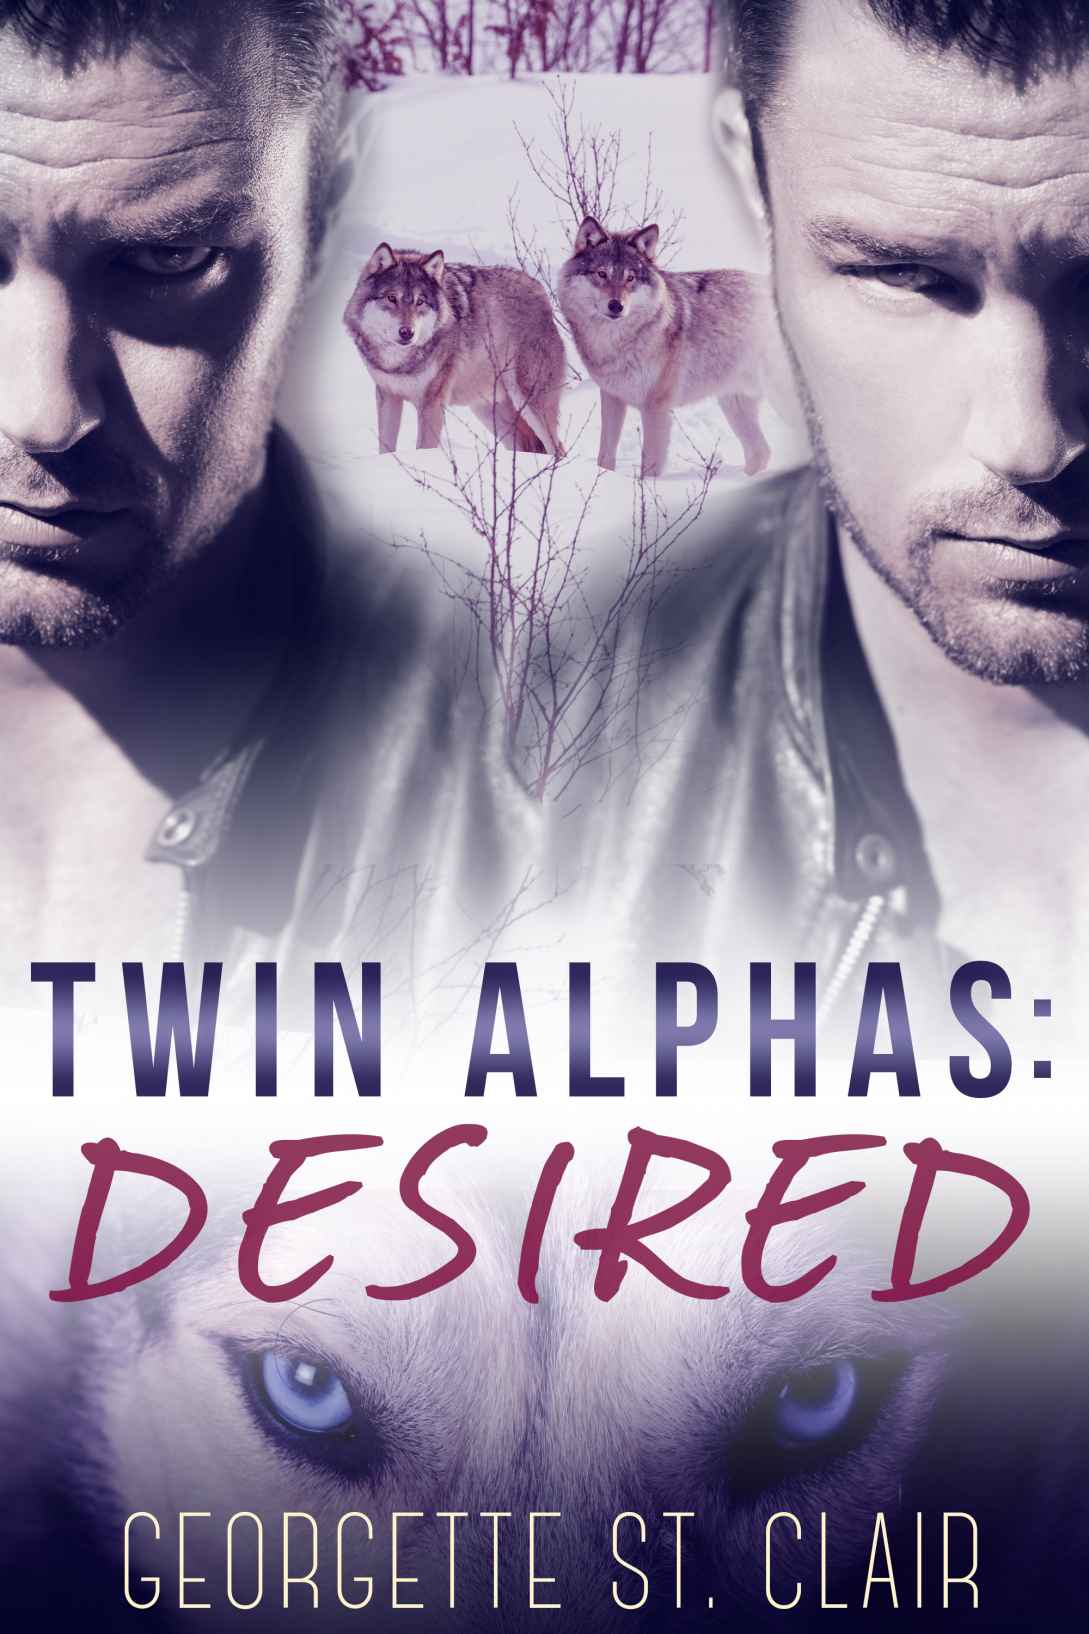 Twin Alphas: Desired (A BBW Paranormal Romance) by Georgette St. Clair